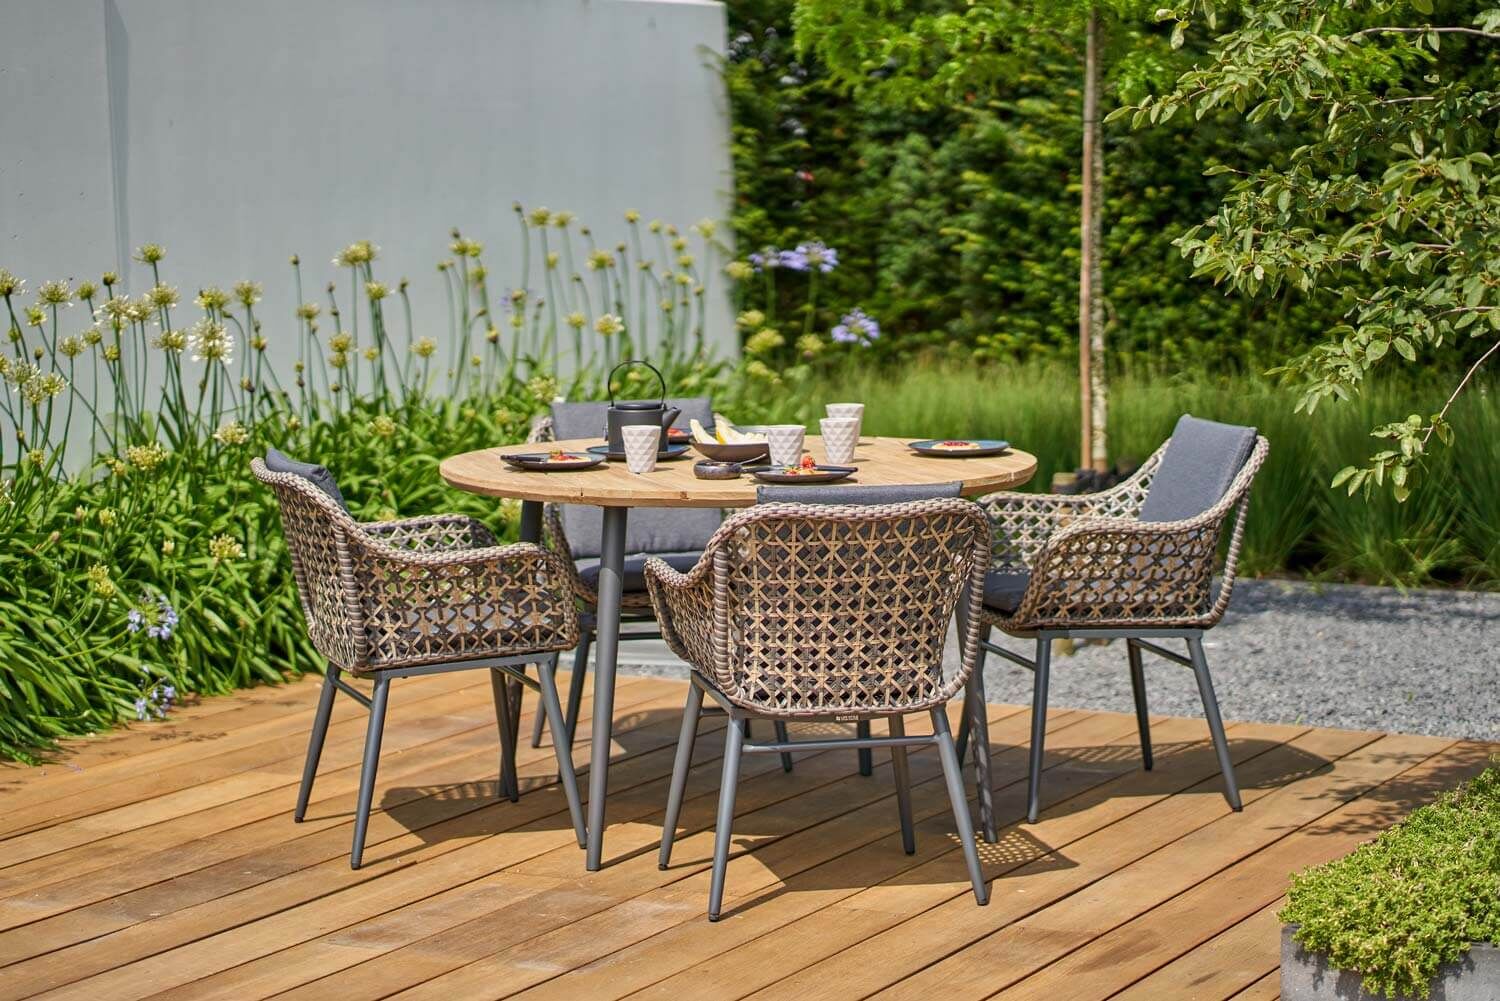 Lifestyle Dolphin/Trente 260 cm dining tuinset 7-delig